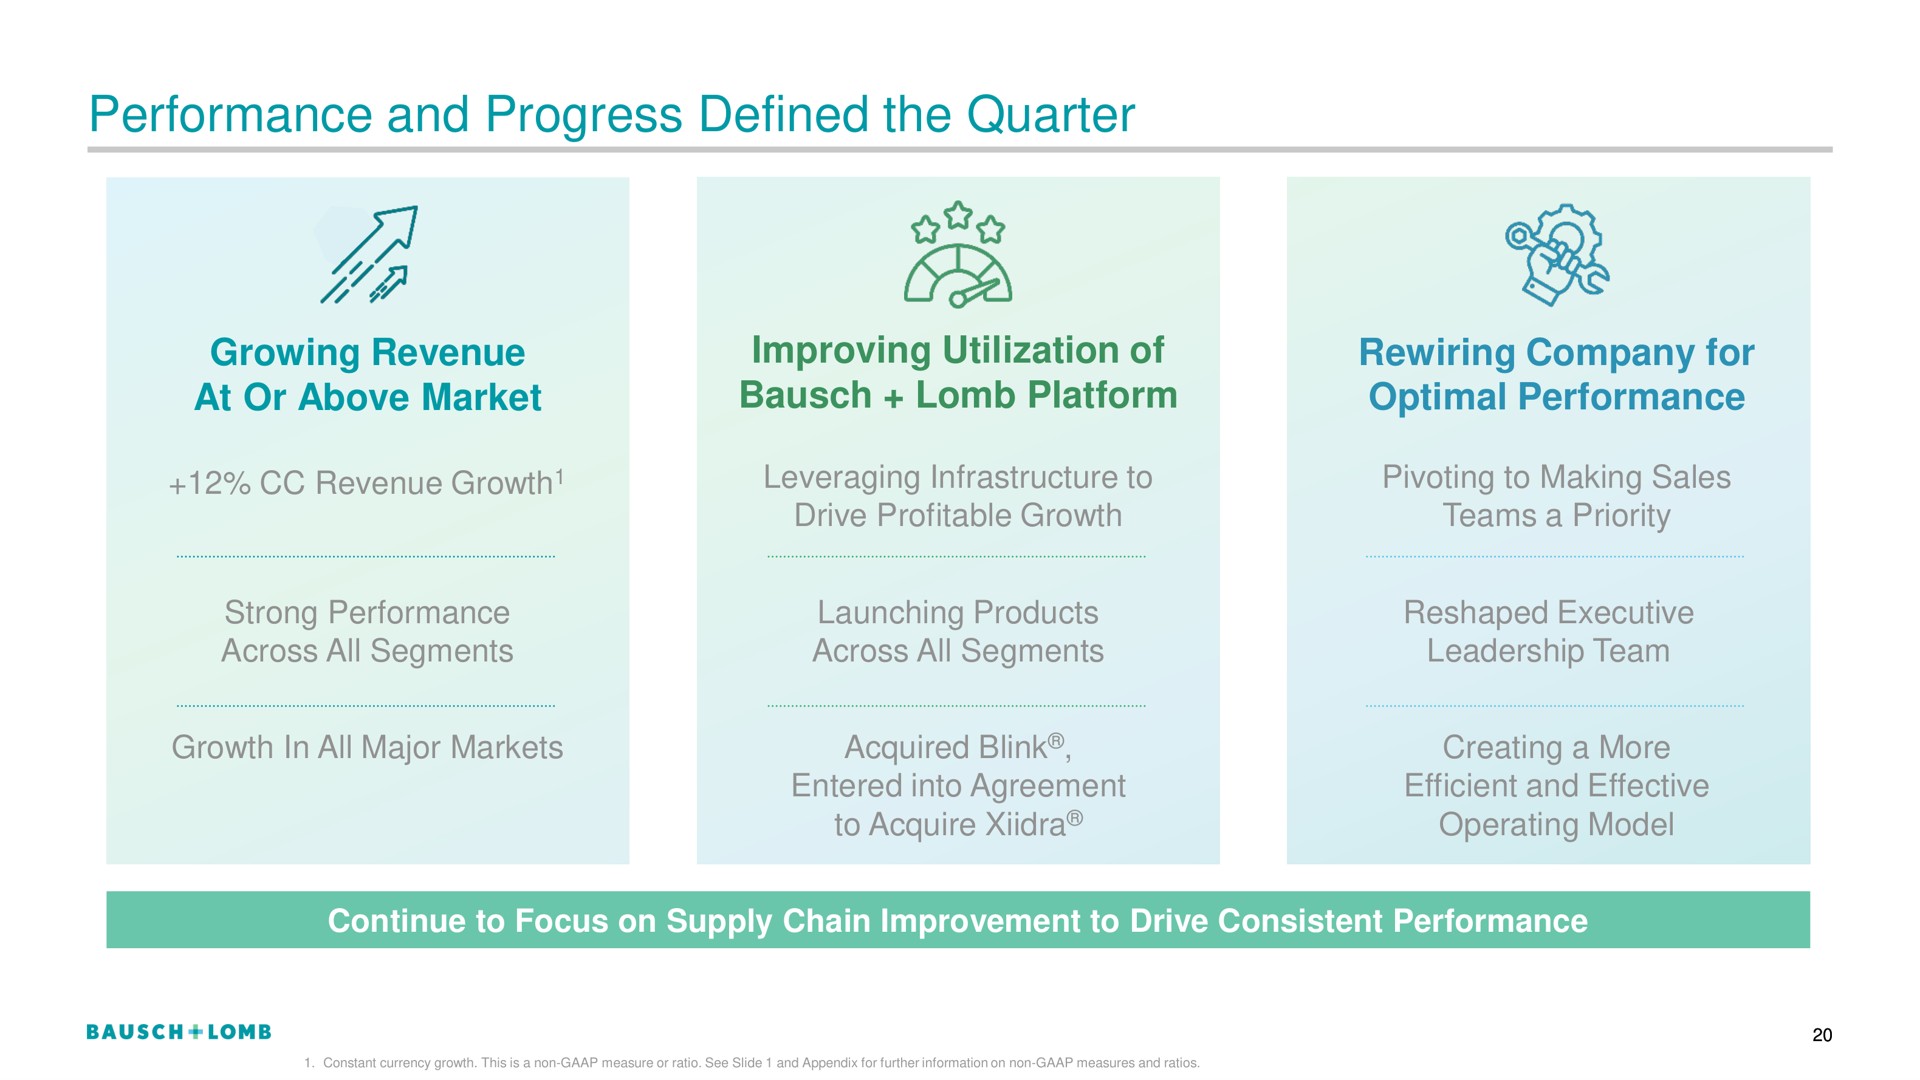 performance and progress defined the quarter | Bausch+Lomb